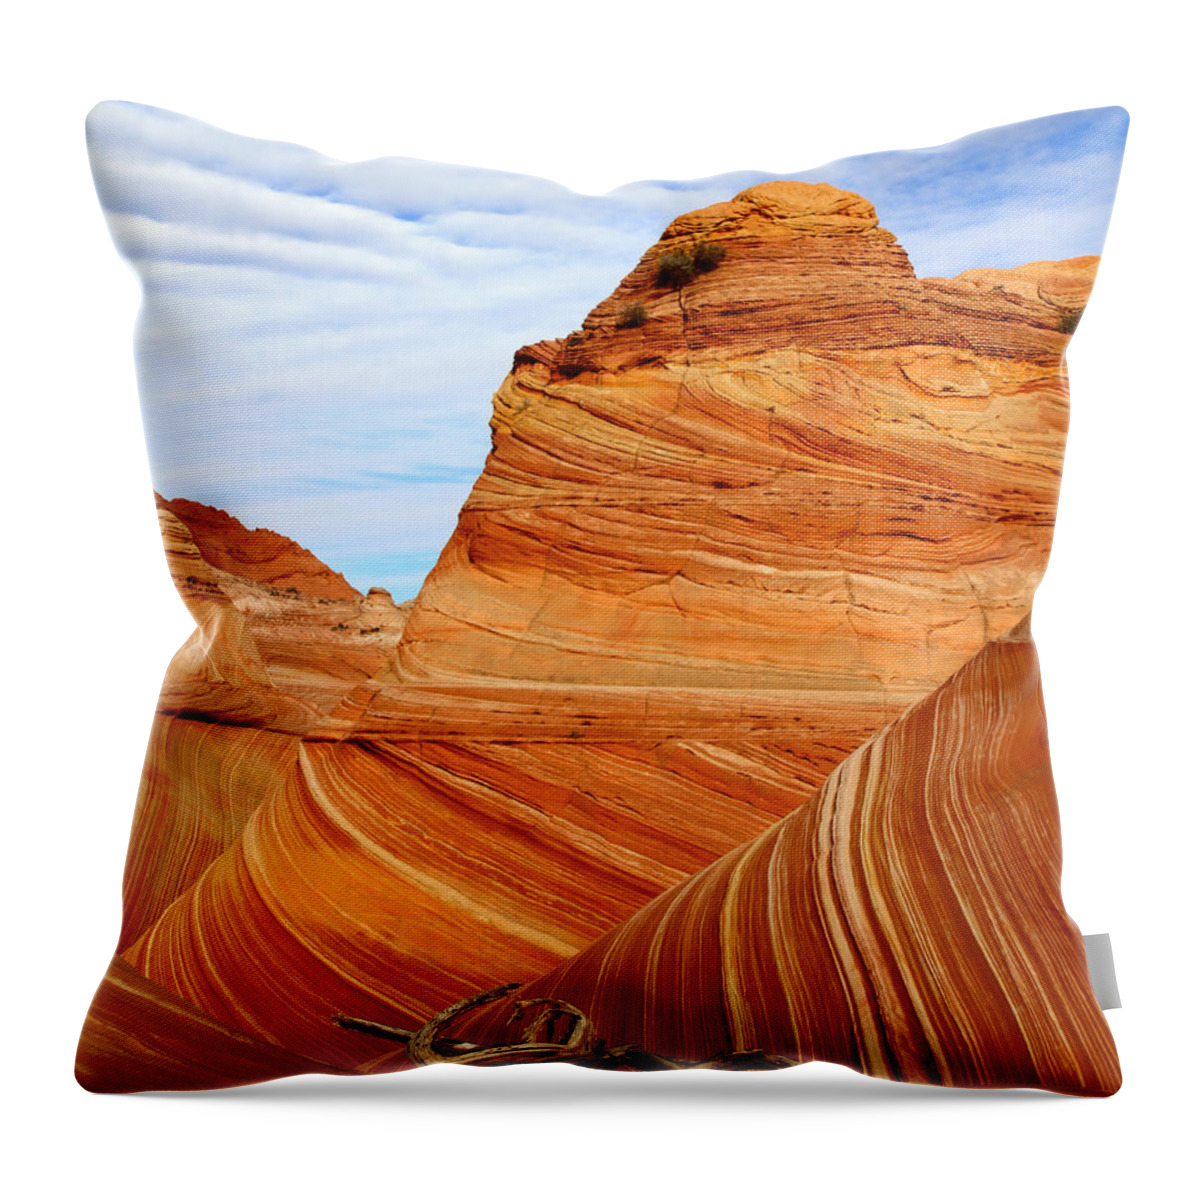 Colorado Plateau Throw Pillow featuring the photograph Petrified Sand Dunes by Ed Riche